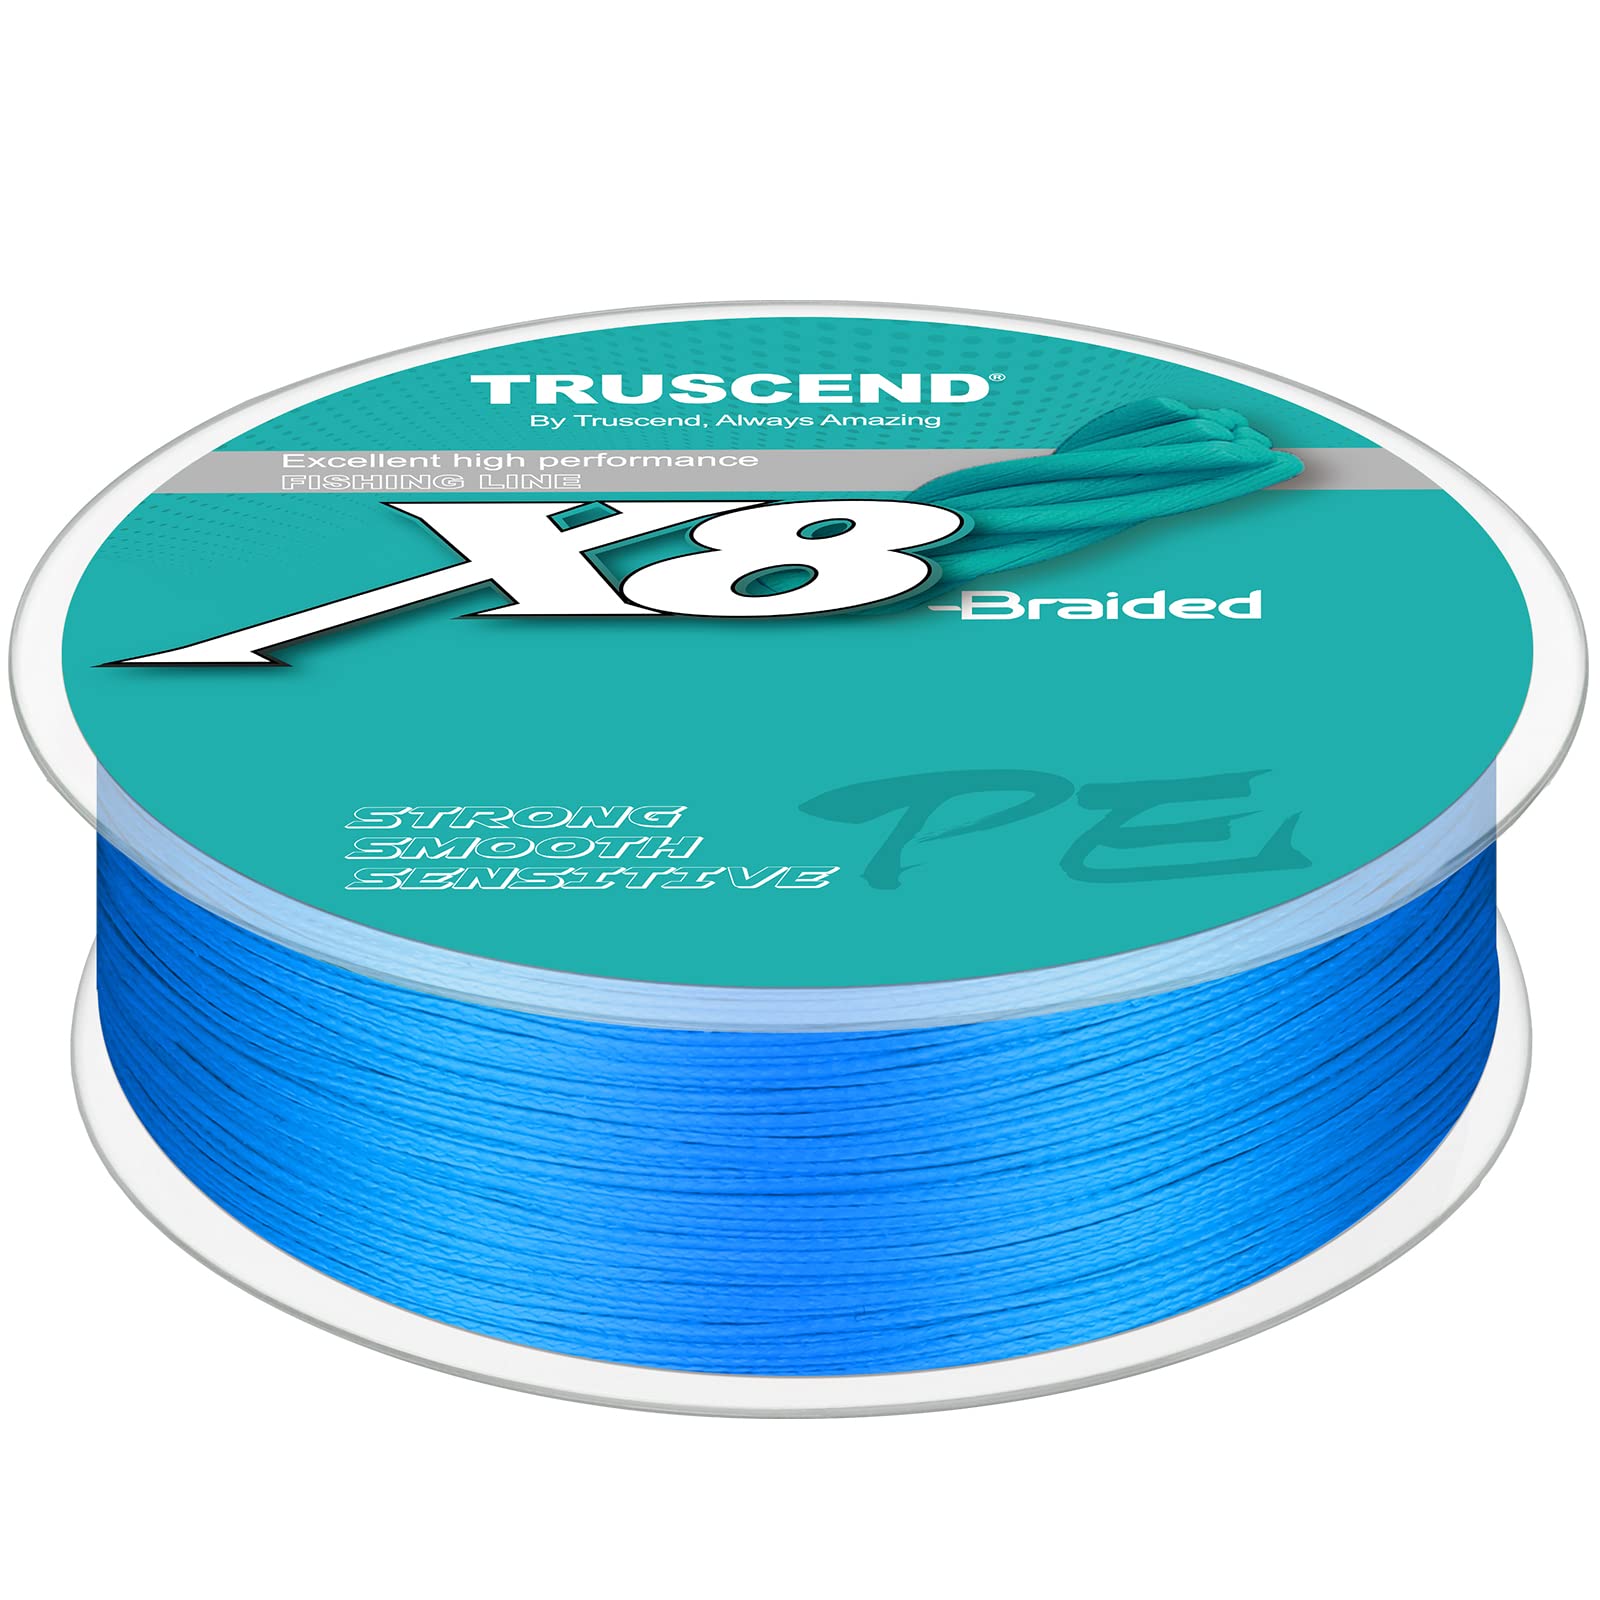 X8 Pro Grade Tournament Braided Fishing Line, Ultra Thin & More Power,  Sensitive, Precise Cast, Softer & Smoother, Abrasion Resistant, No Stretch,  Zero Memory, by Top World OEM Manufactory 